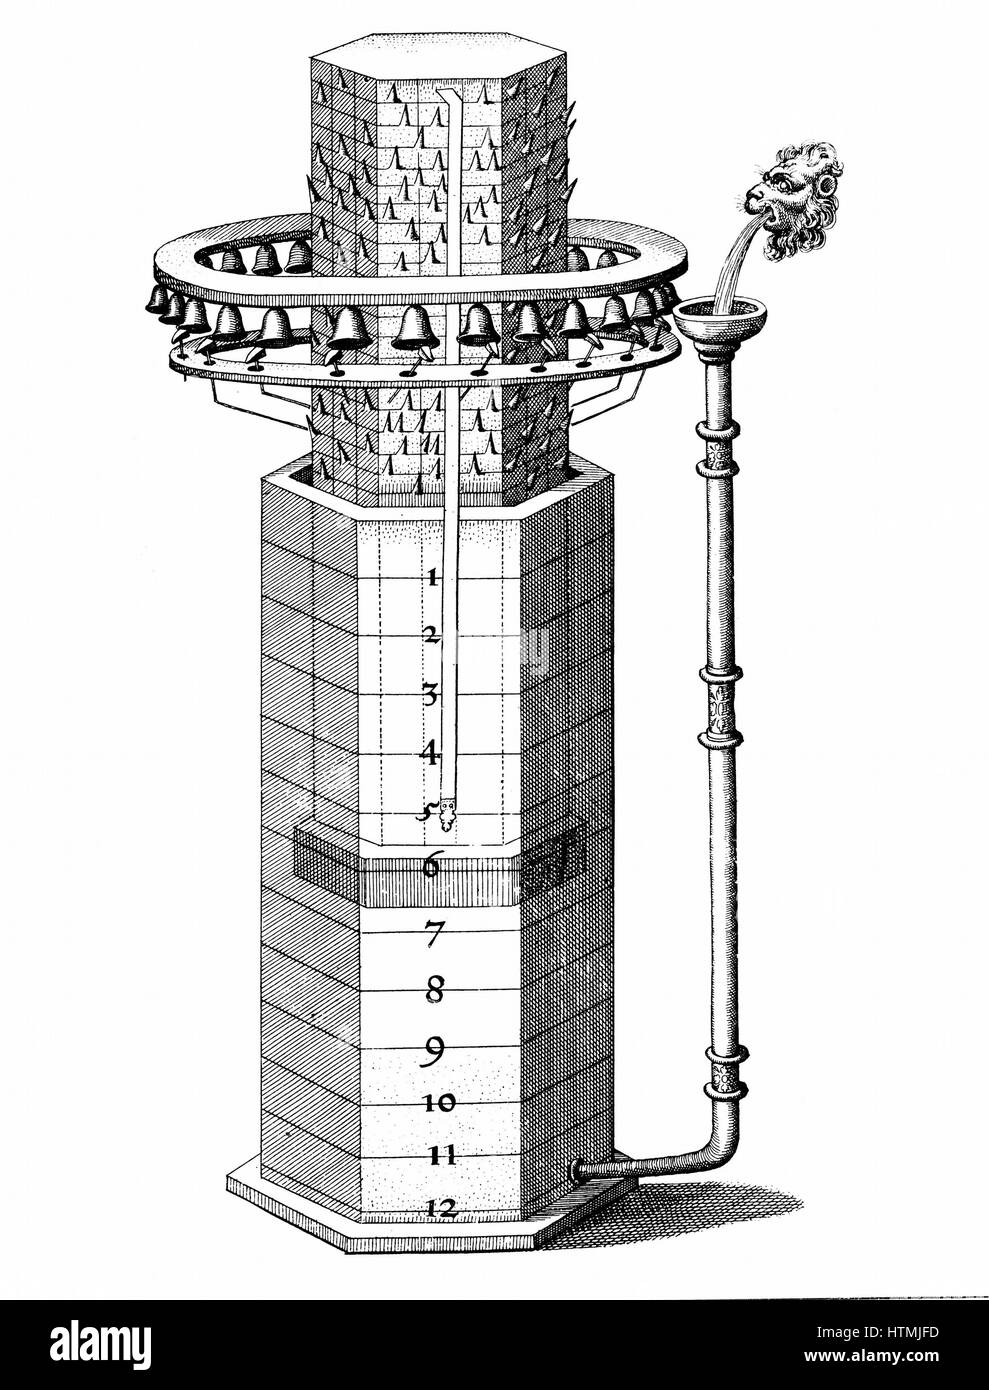 Clepsydra (water clock) indicating hours and chiming. From Robert Fludd 'Utriusque cosmi … historia' Oppenheim, 1617-19. Engraving Stock Photo